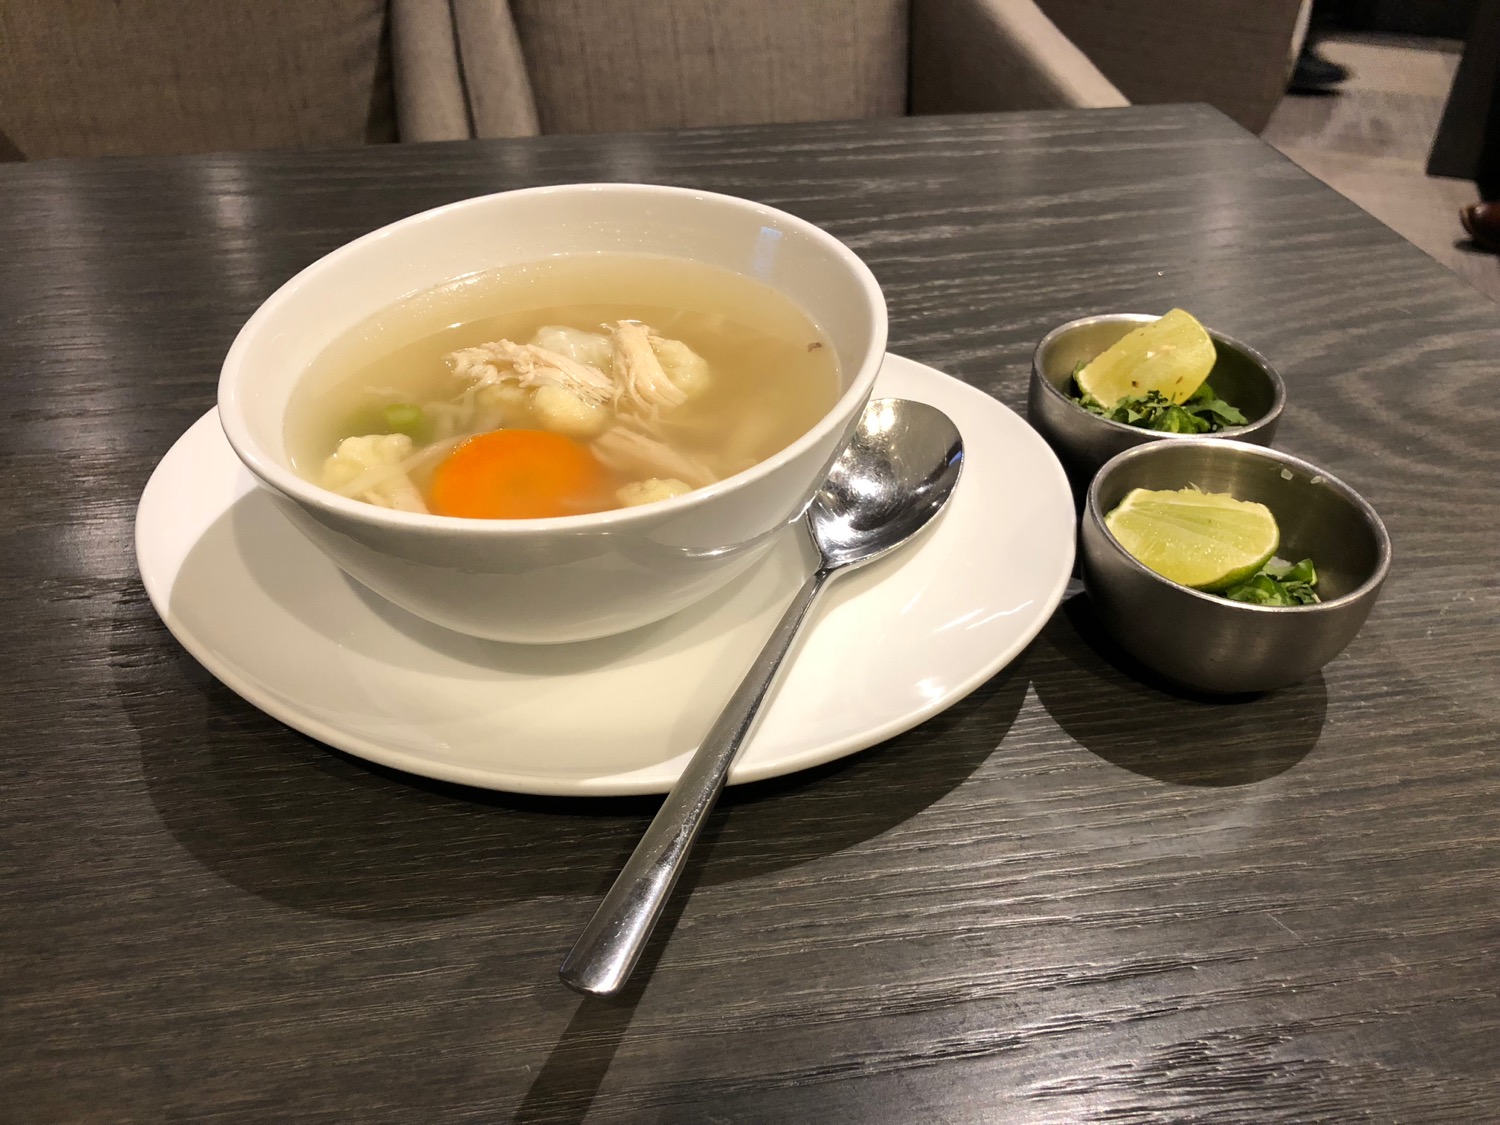 a bowl of soup with a spoon and small bowls of vegetables on a table